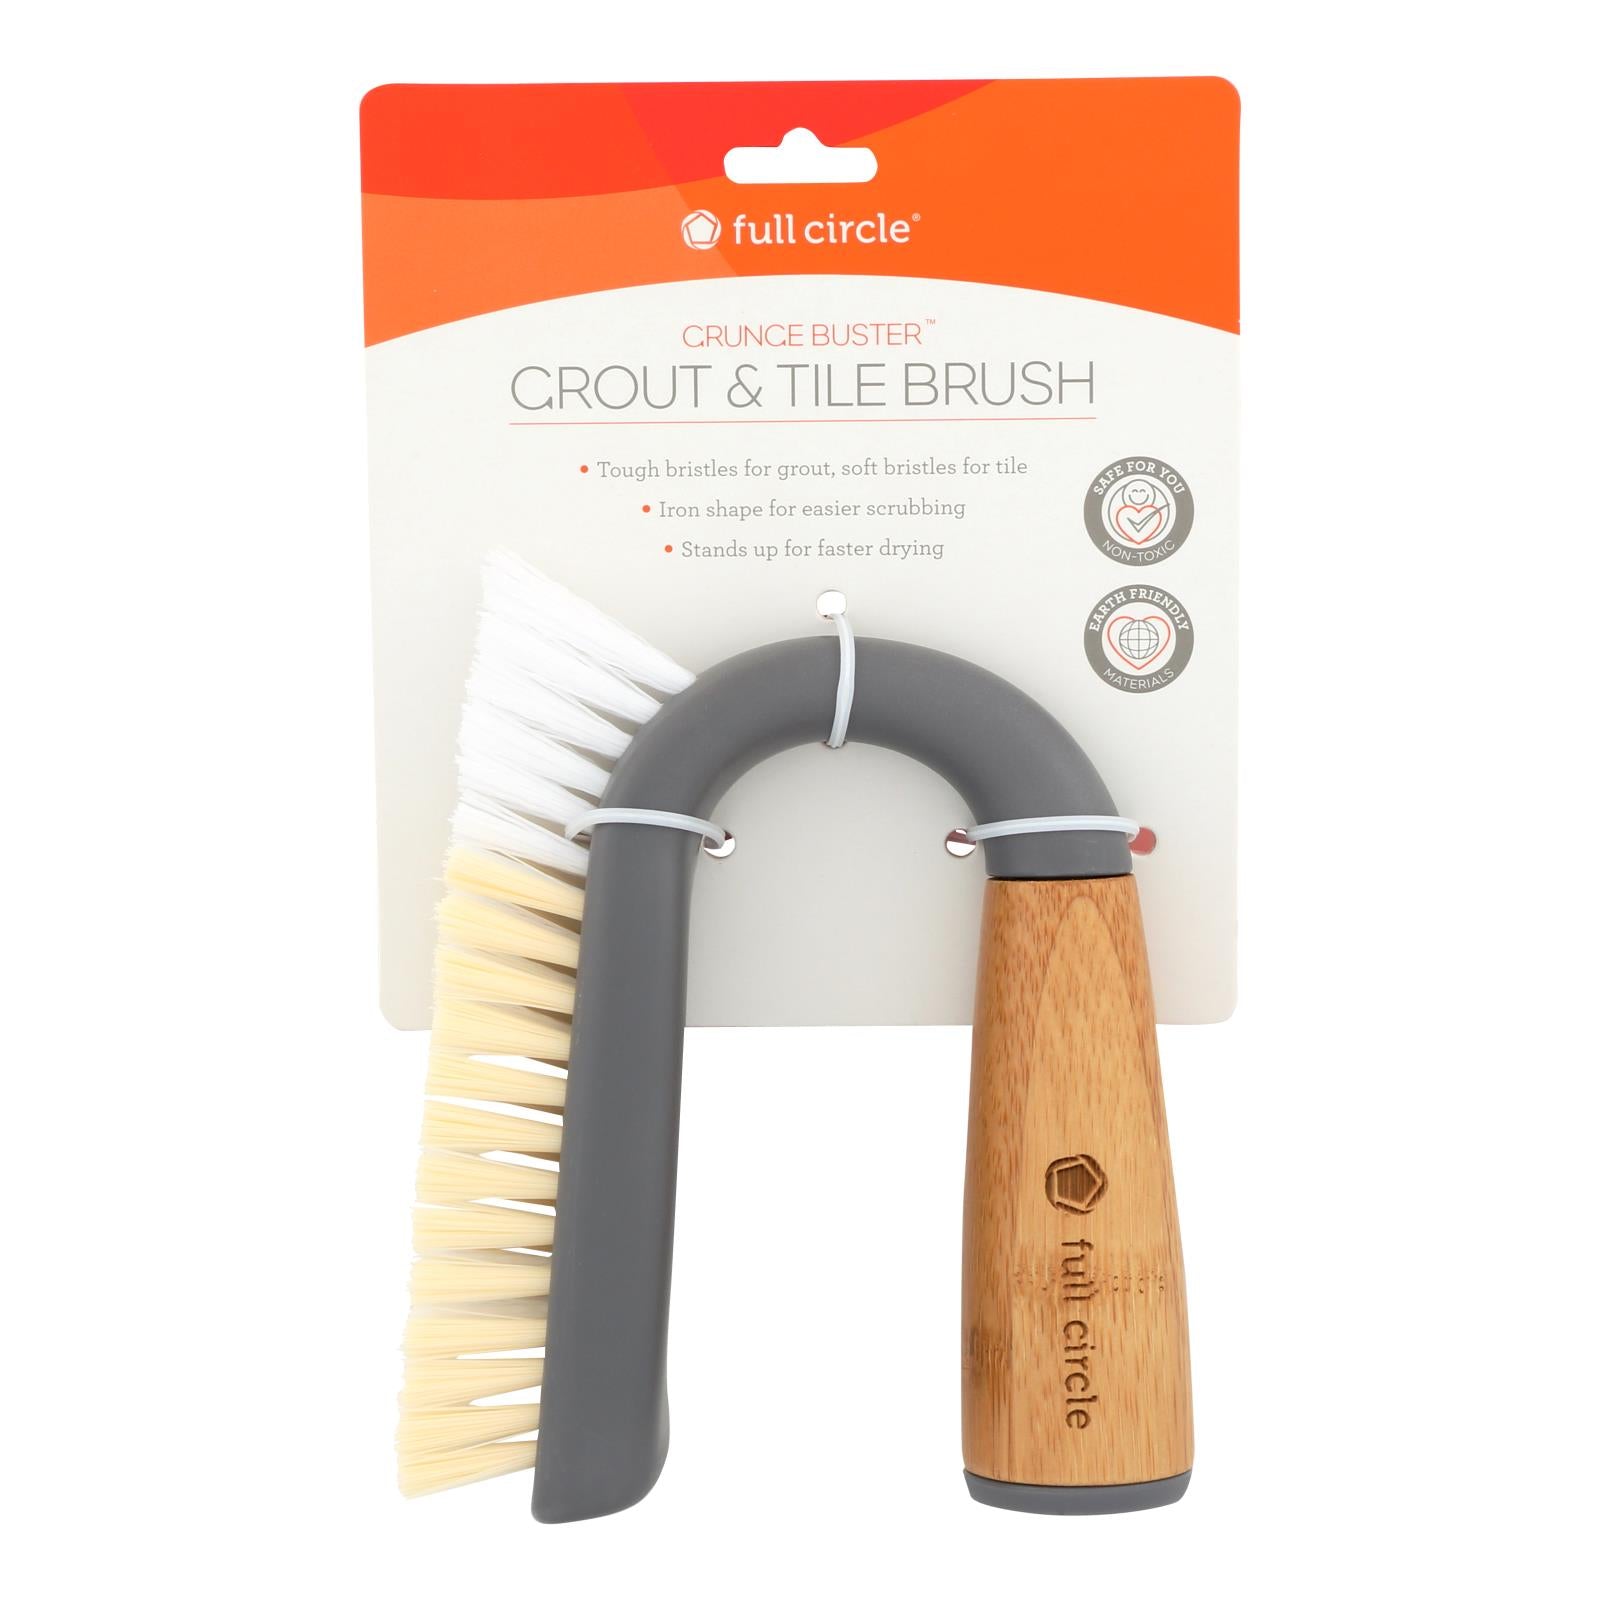 Full Circle Home - Brush Grout & Tile Grey - Case Of 6 - Count